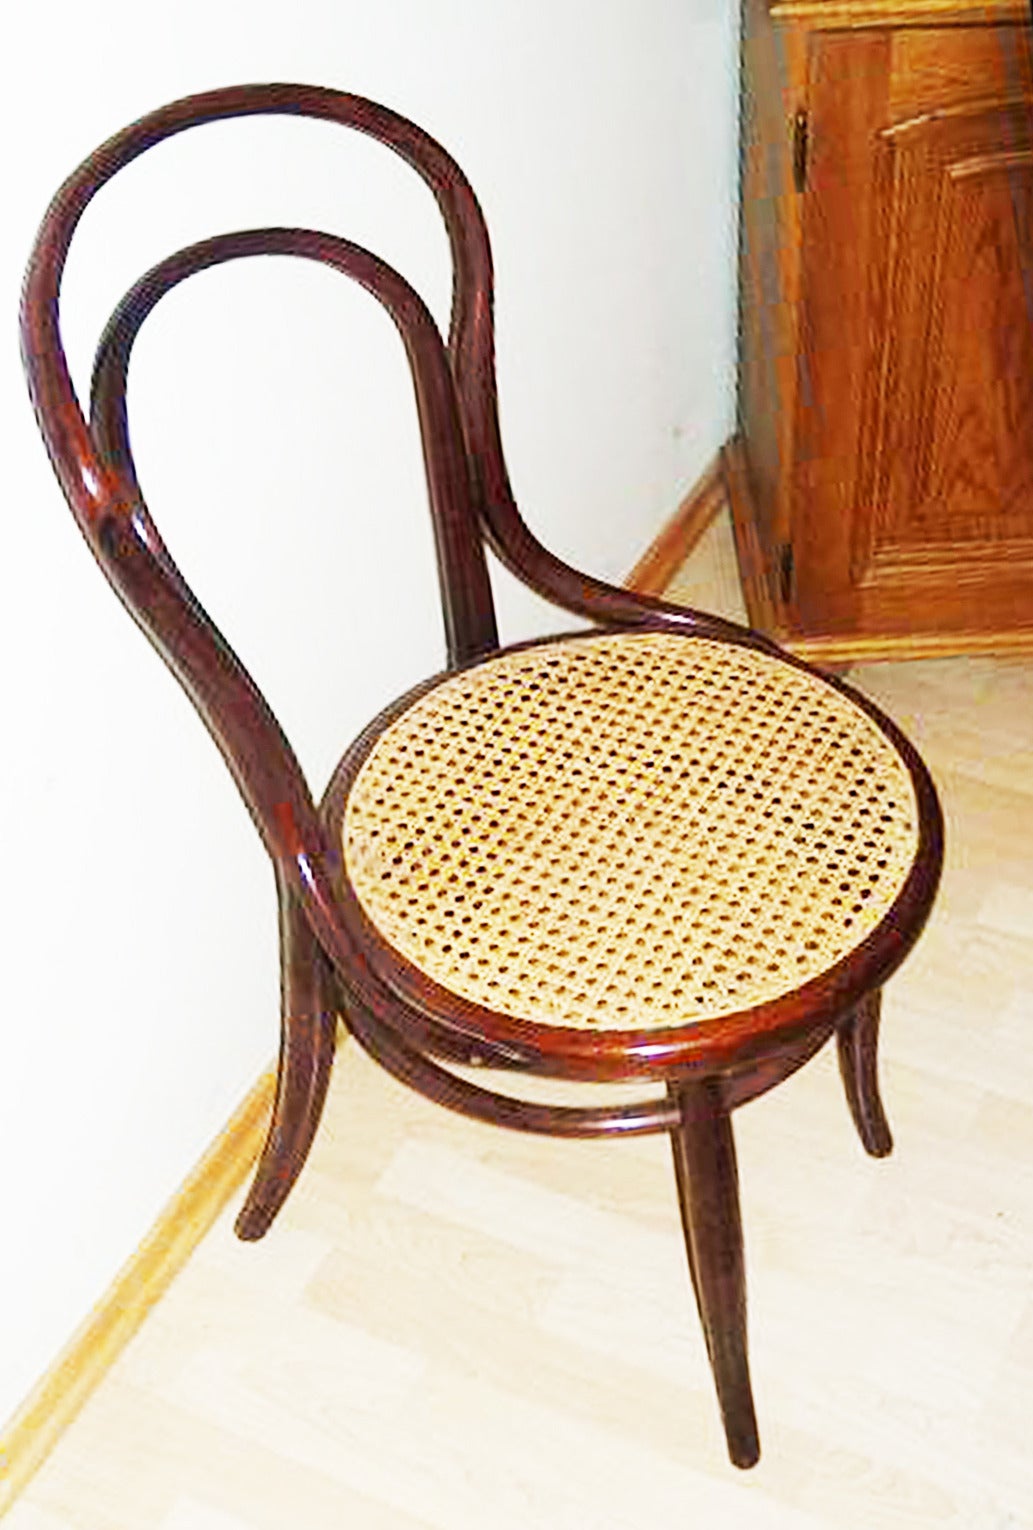 this model is similar to famous thonet number 14 
restored with new canning.
delivery time about 3-4 weeks.